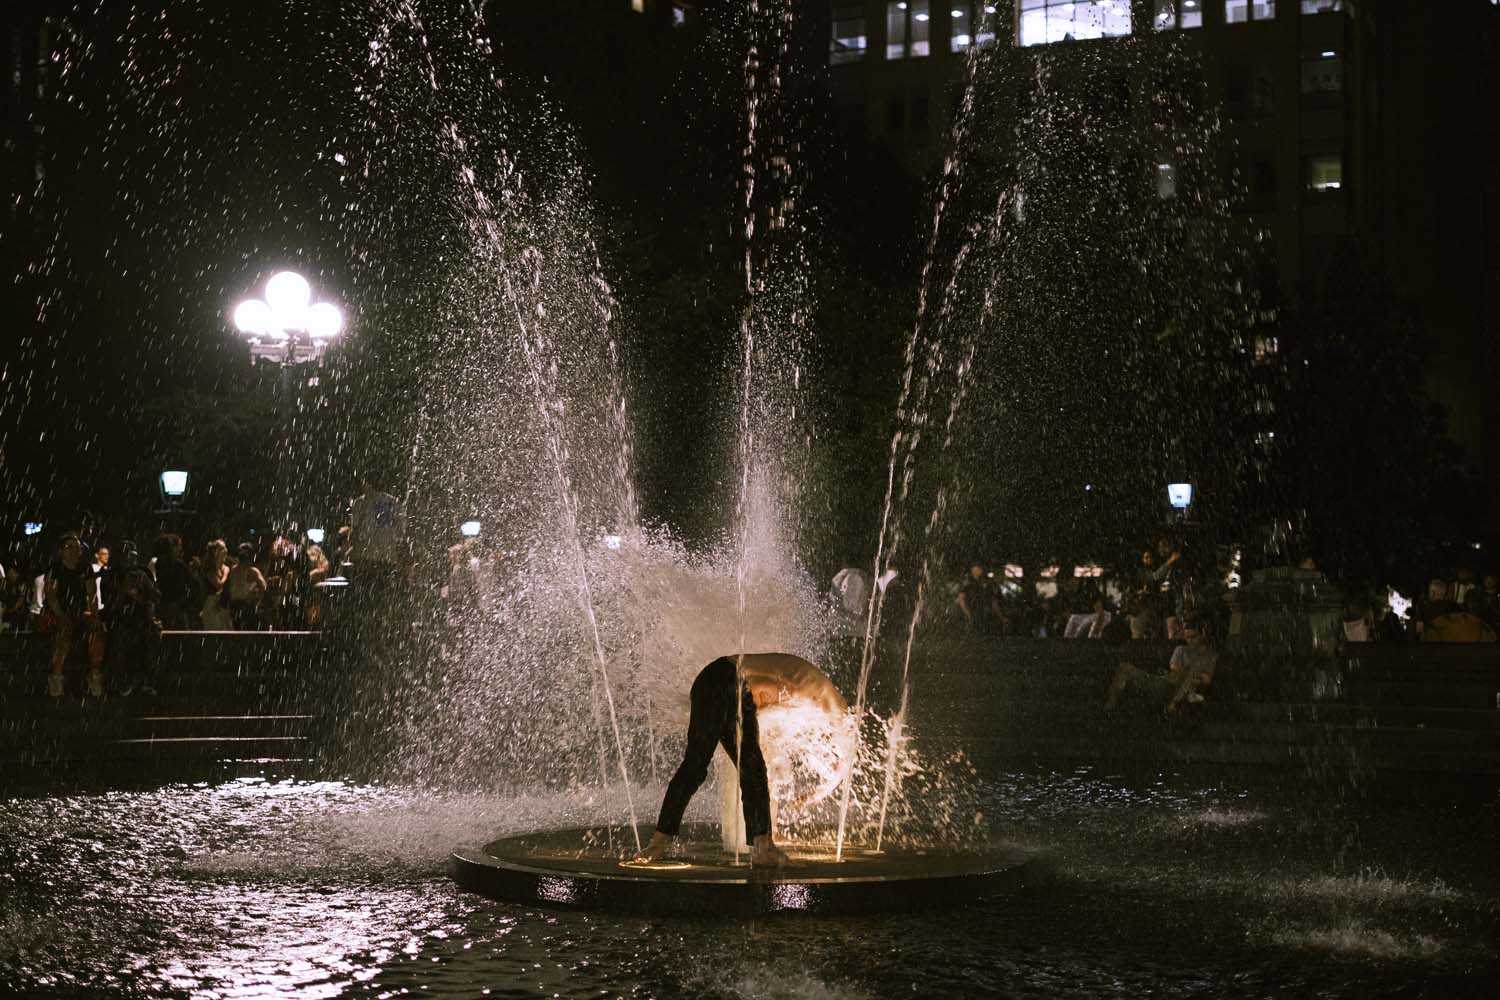 Shirtless man standing in New York City fountain with his head in a jet of water